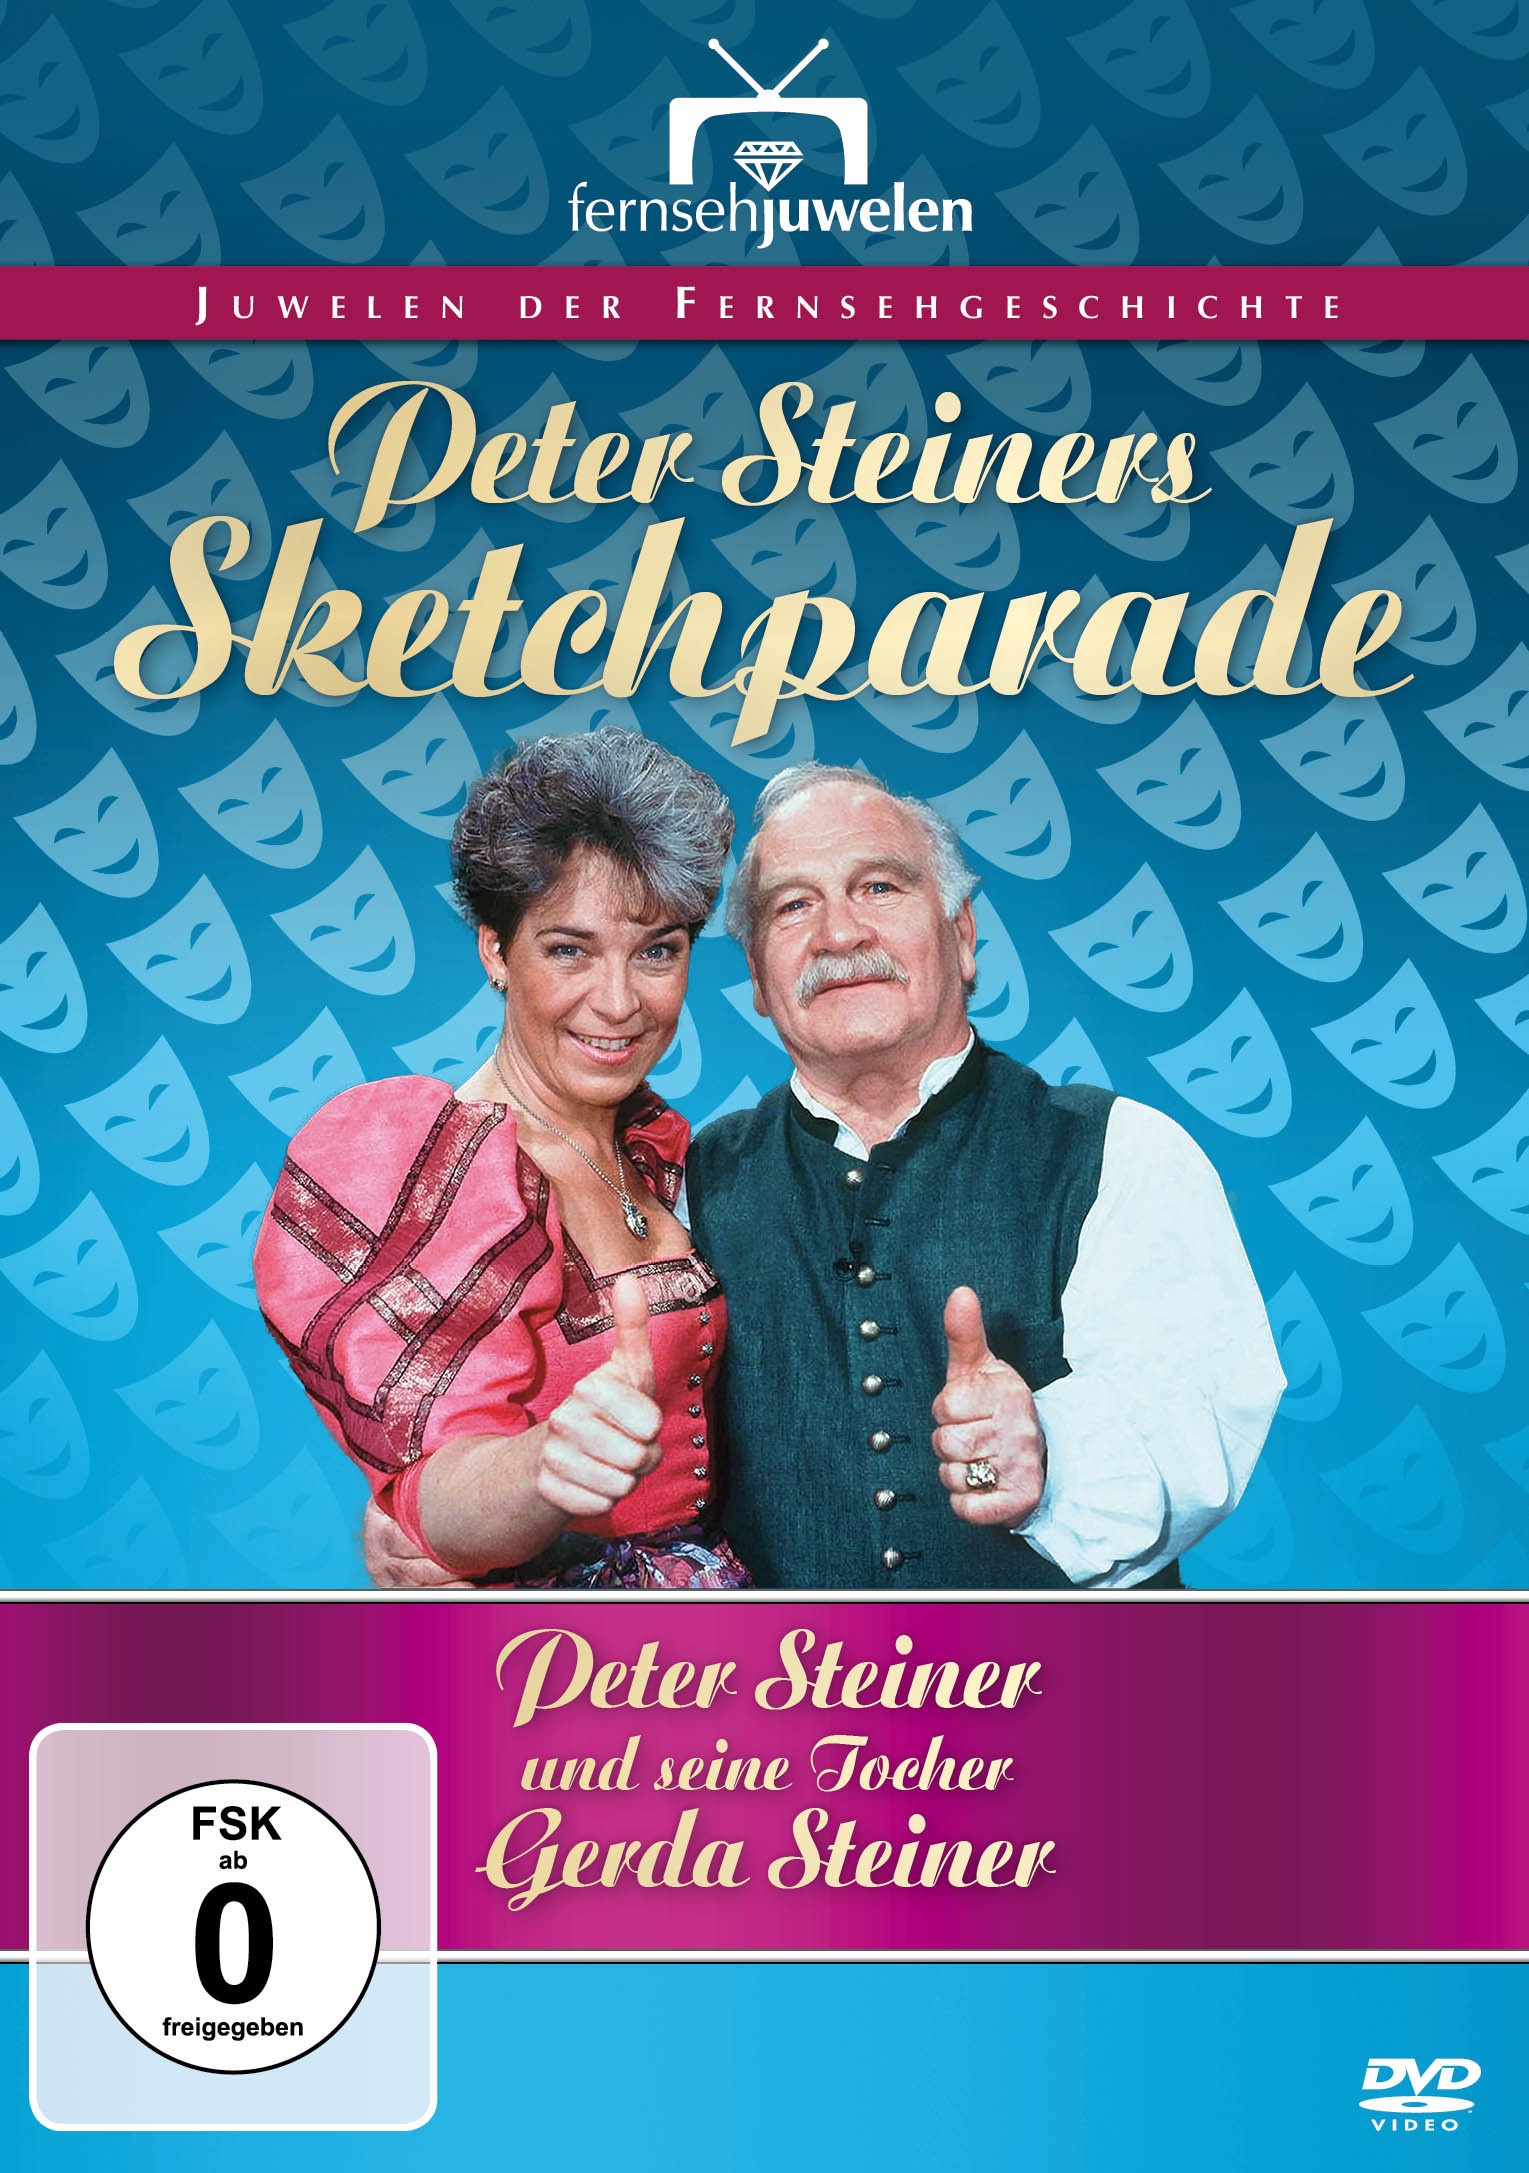 Peter Steiners Sketchparade (DVD)